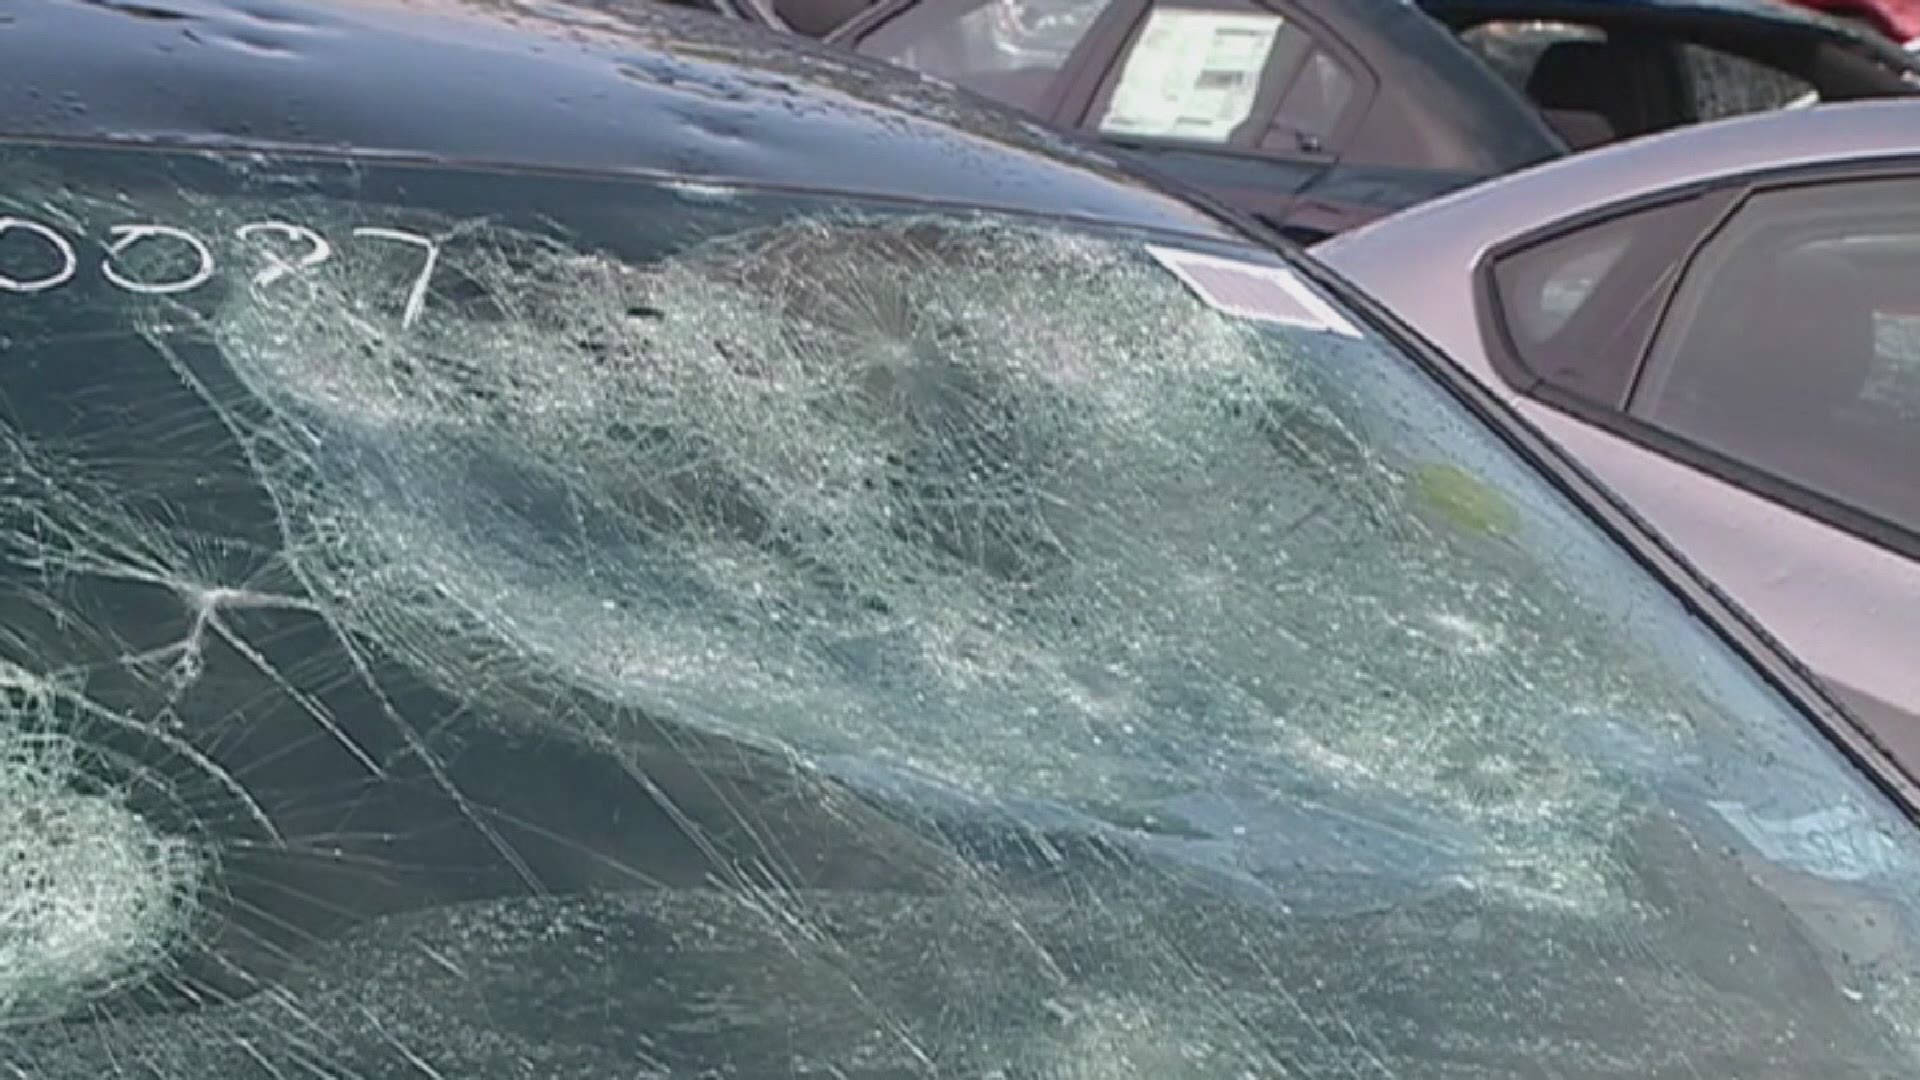 Severe weather brings a potential for hail, and hail presents a whole slew of issues -- especially for car owners.